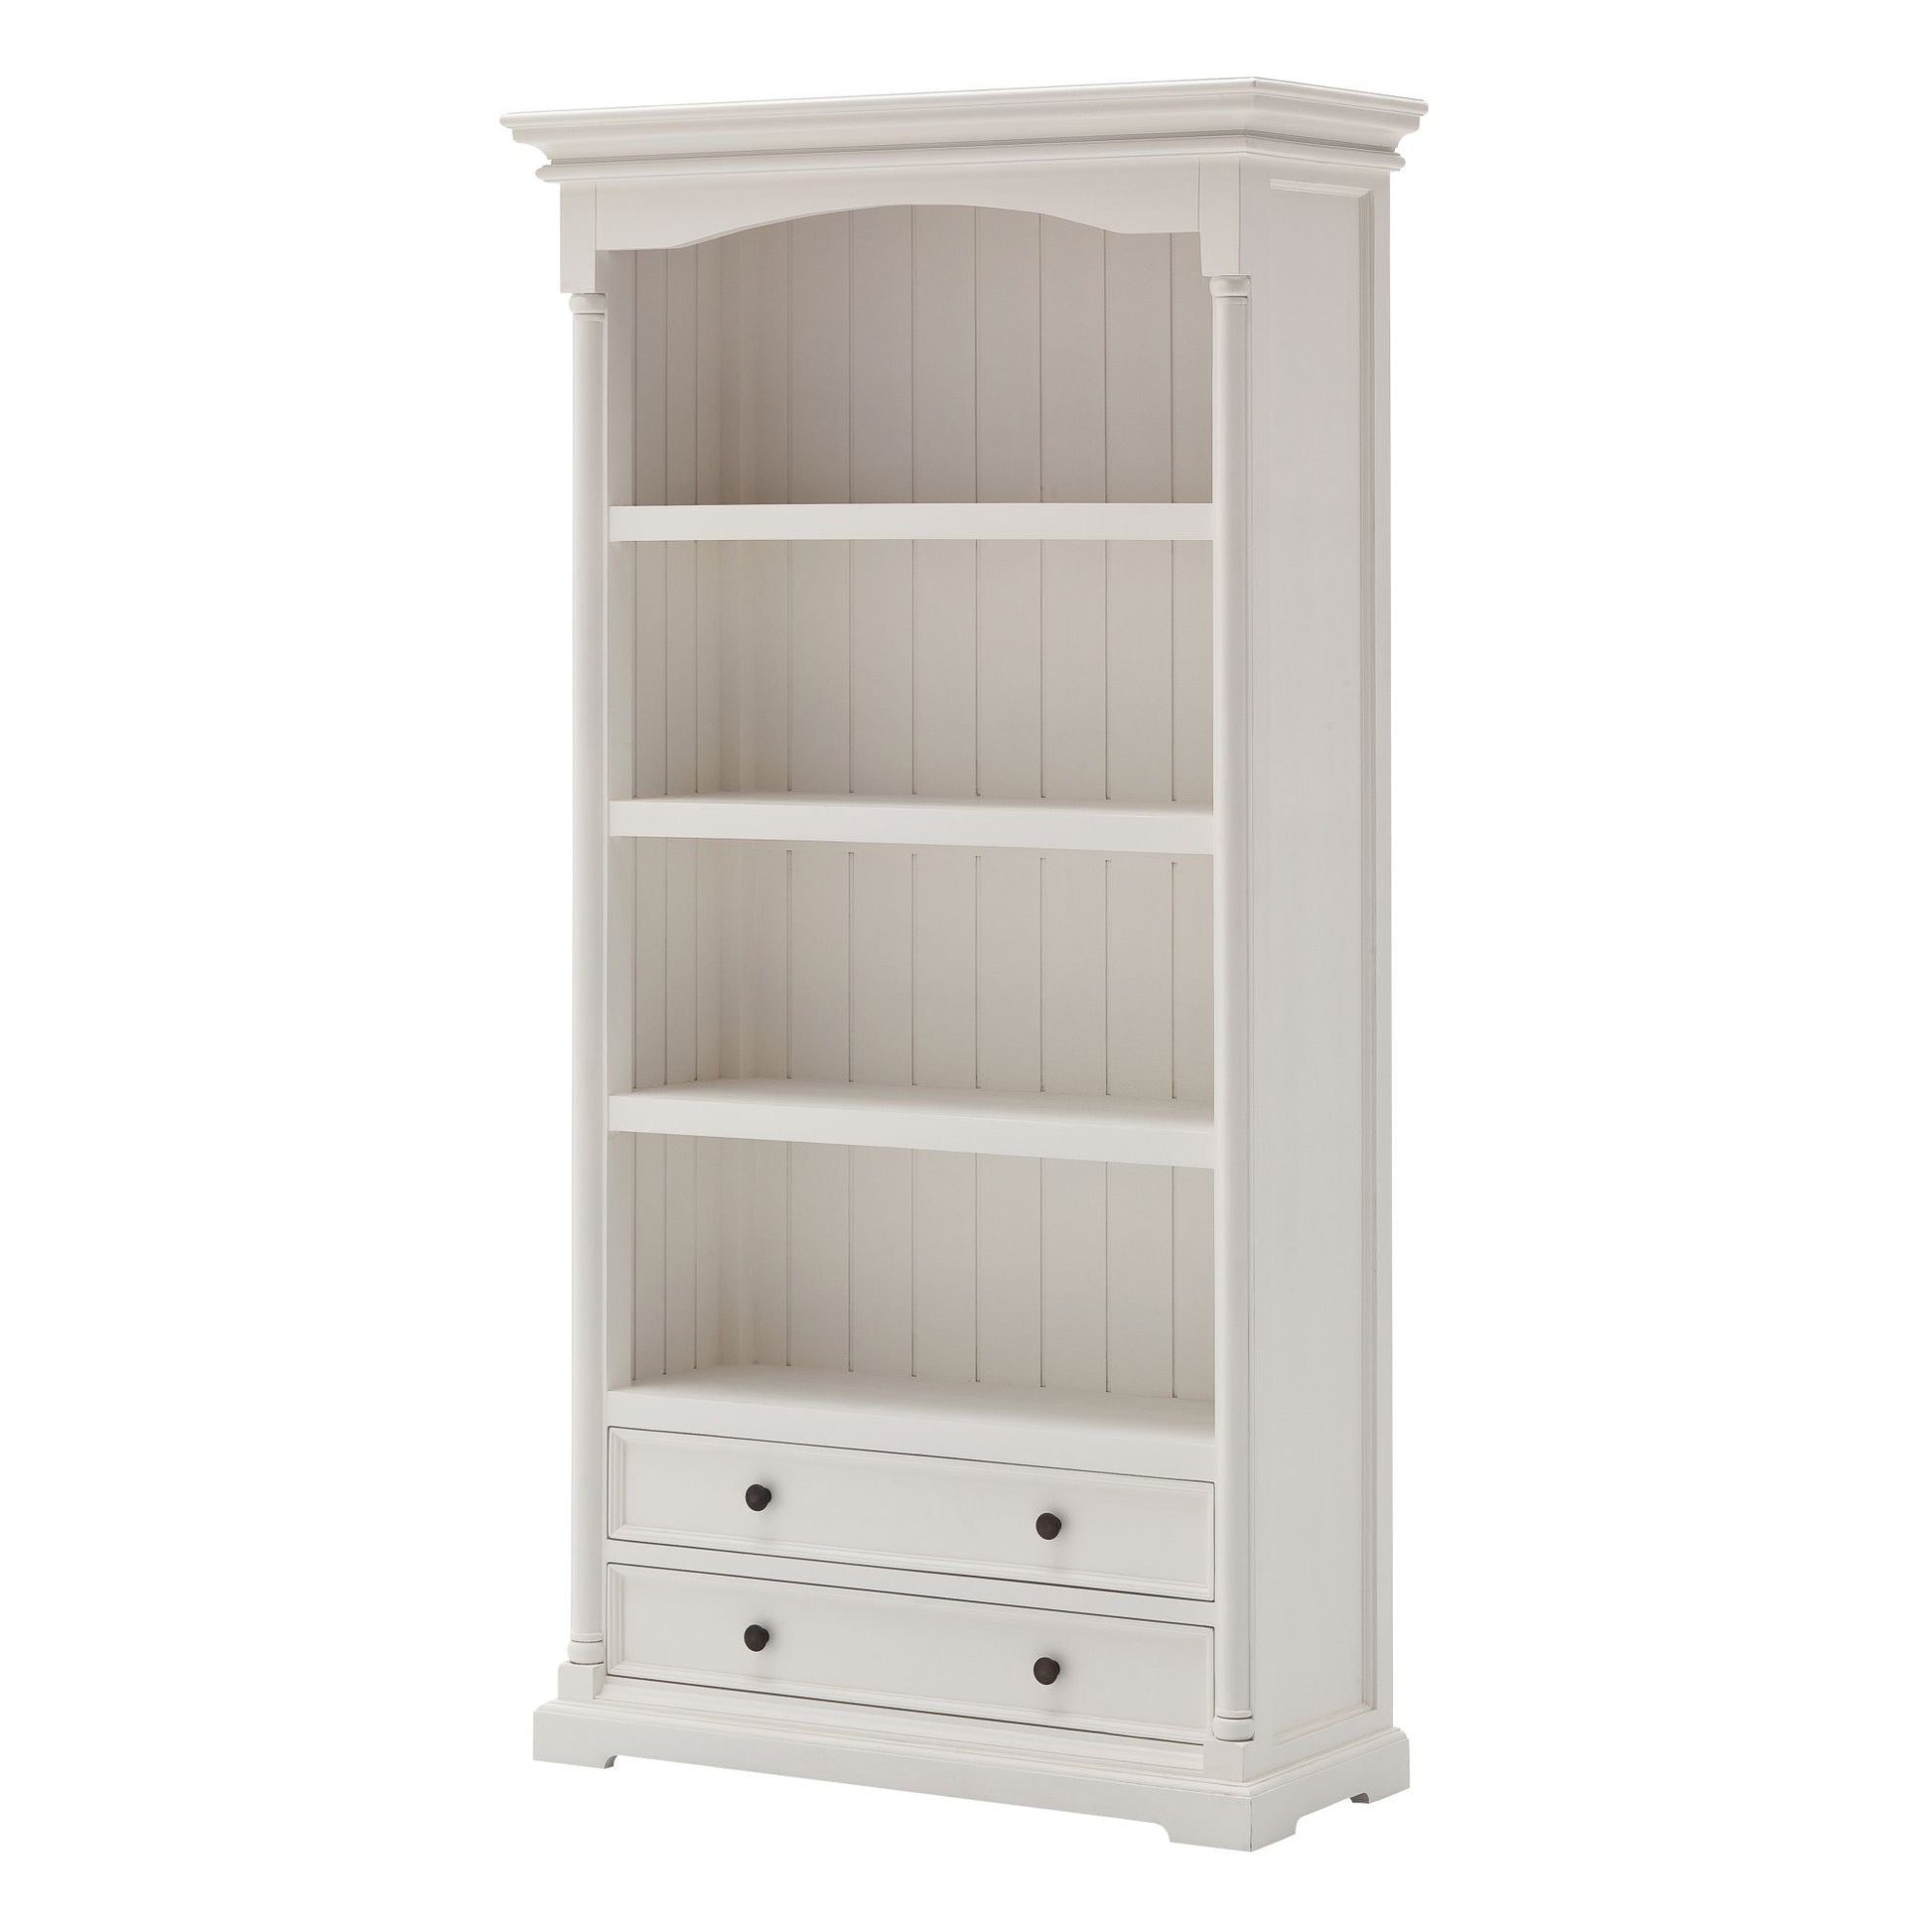 NovaSolo Provence 39" Classic White Mahogany Display Cabinet With 2 Drawers & 4 Shelves